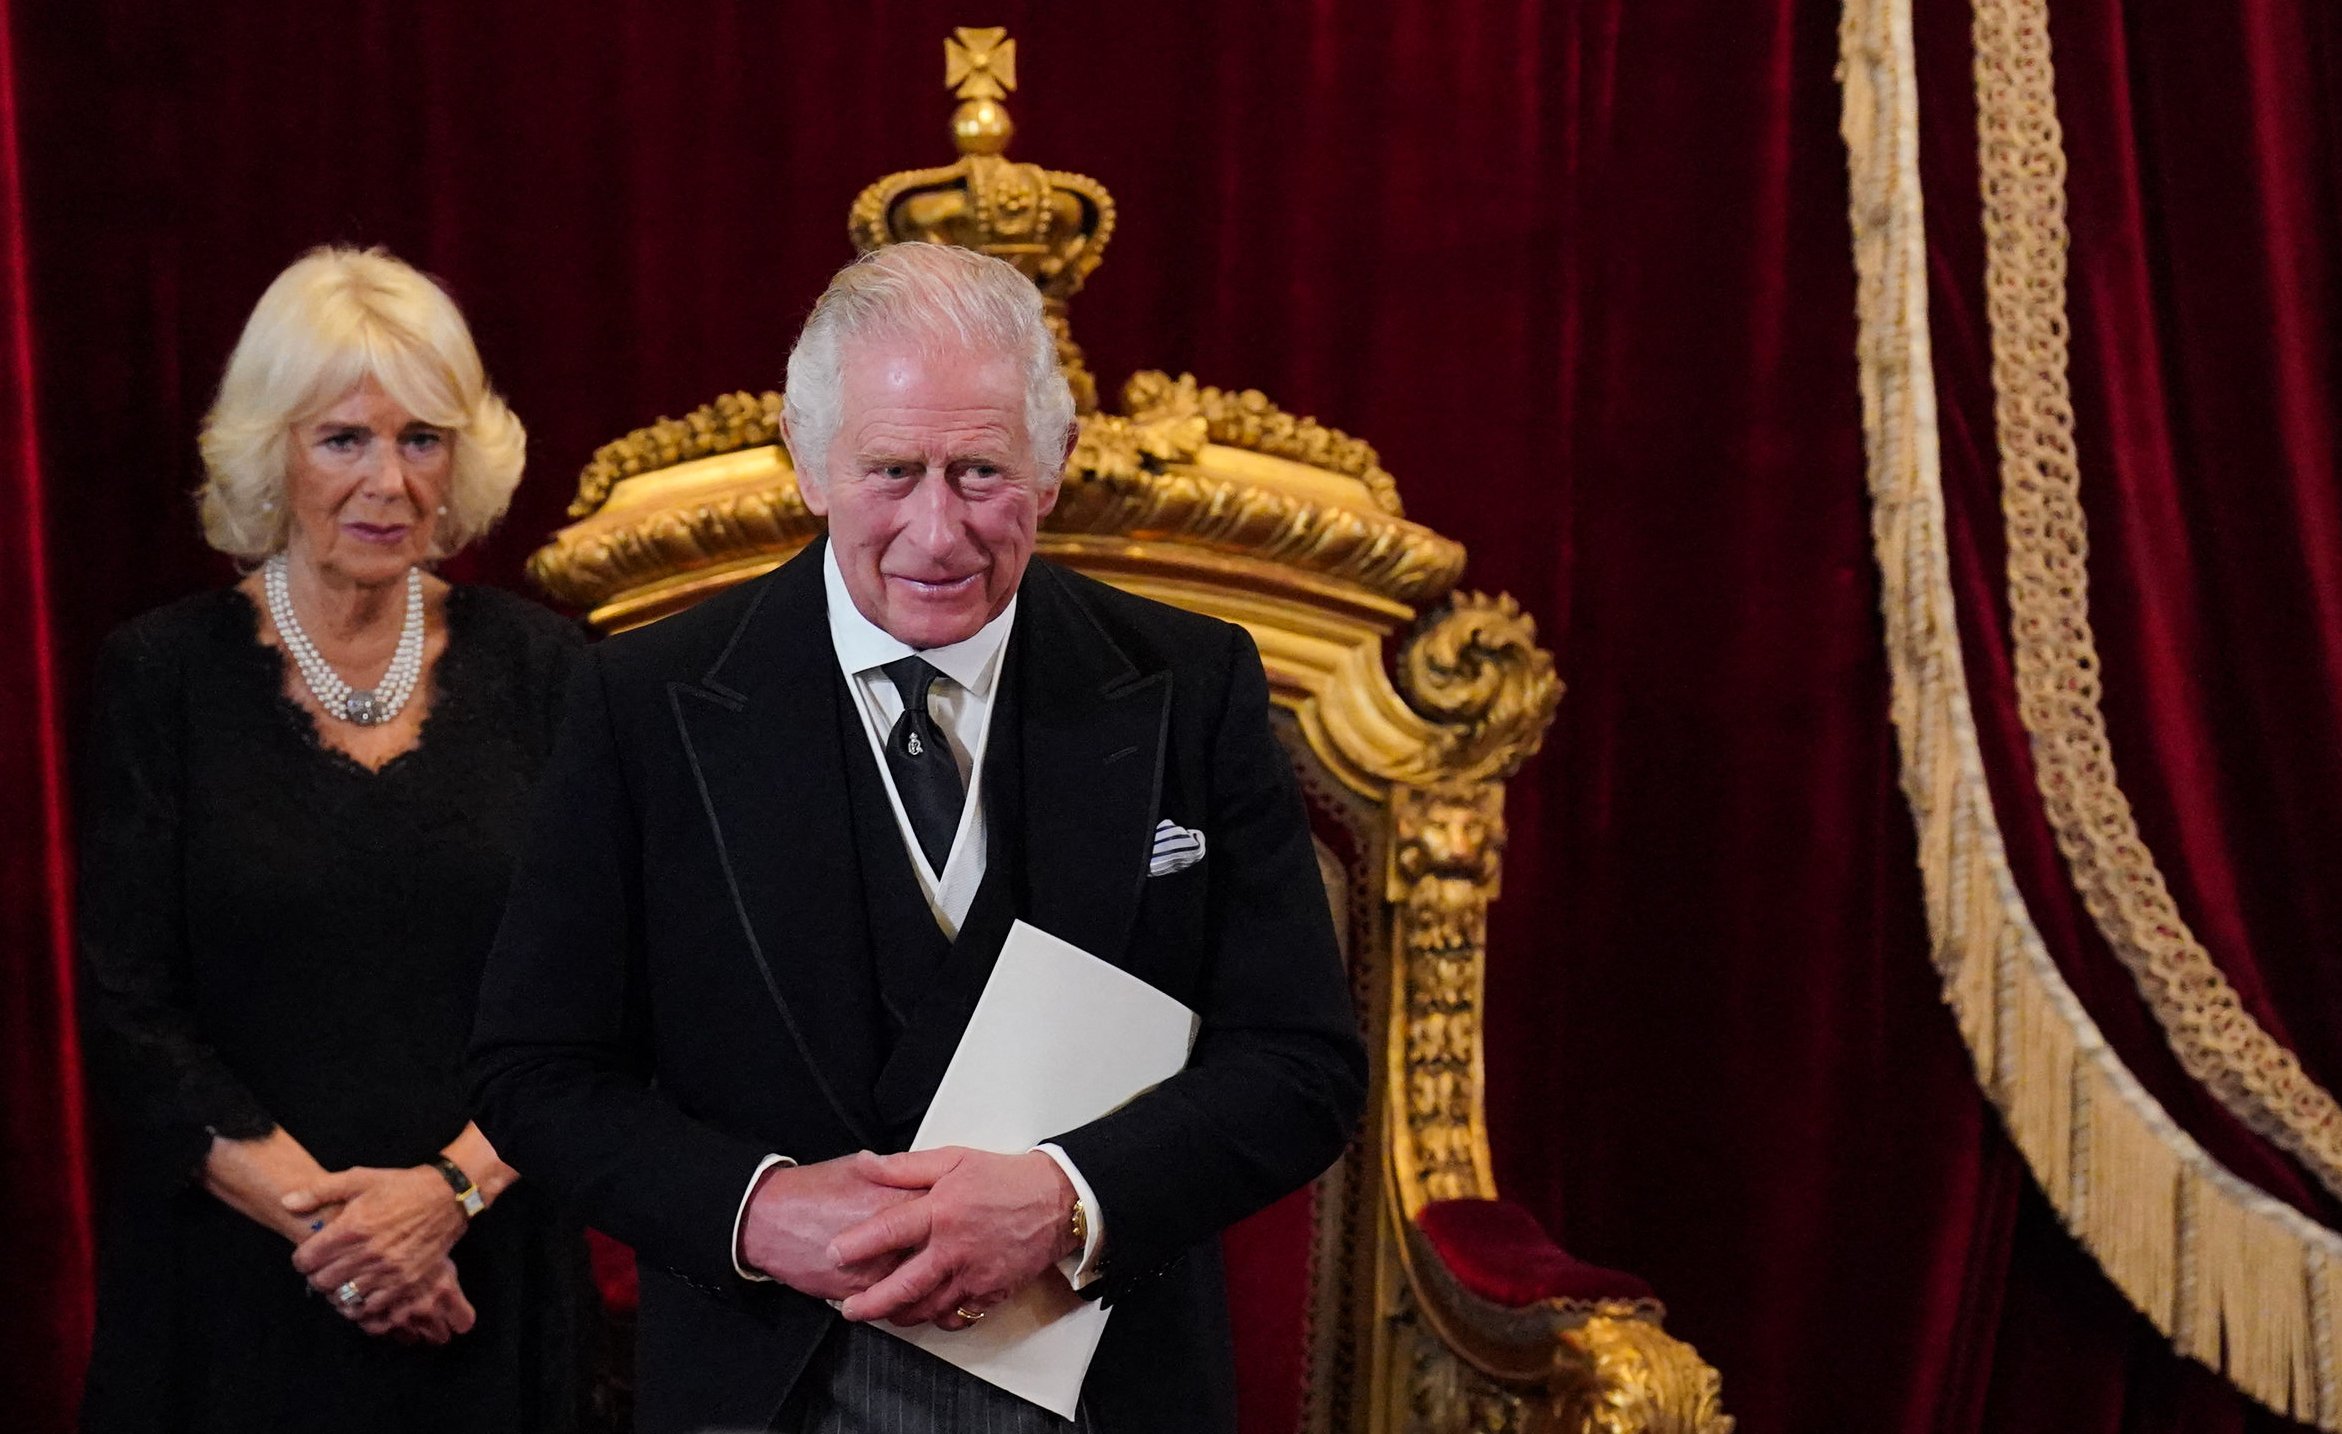 Camilla, Queen Consort reacts as Britain's King Charles III smiles at a meeting of the Accession Council inside St James's Palace in London on September 10, 2022. | Source: Getty Images